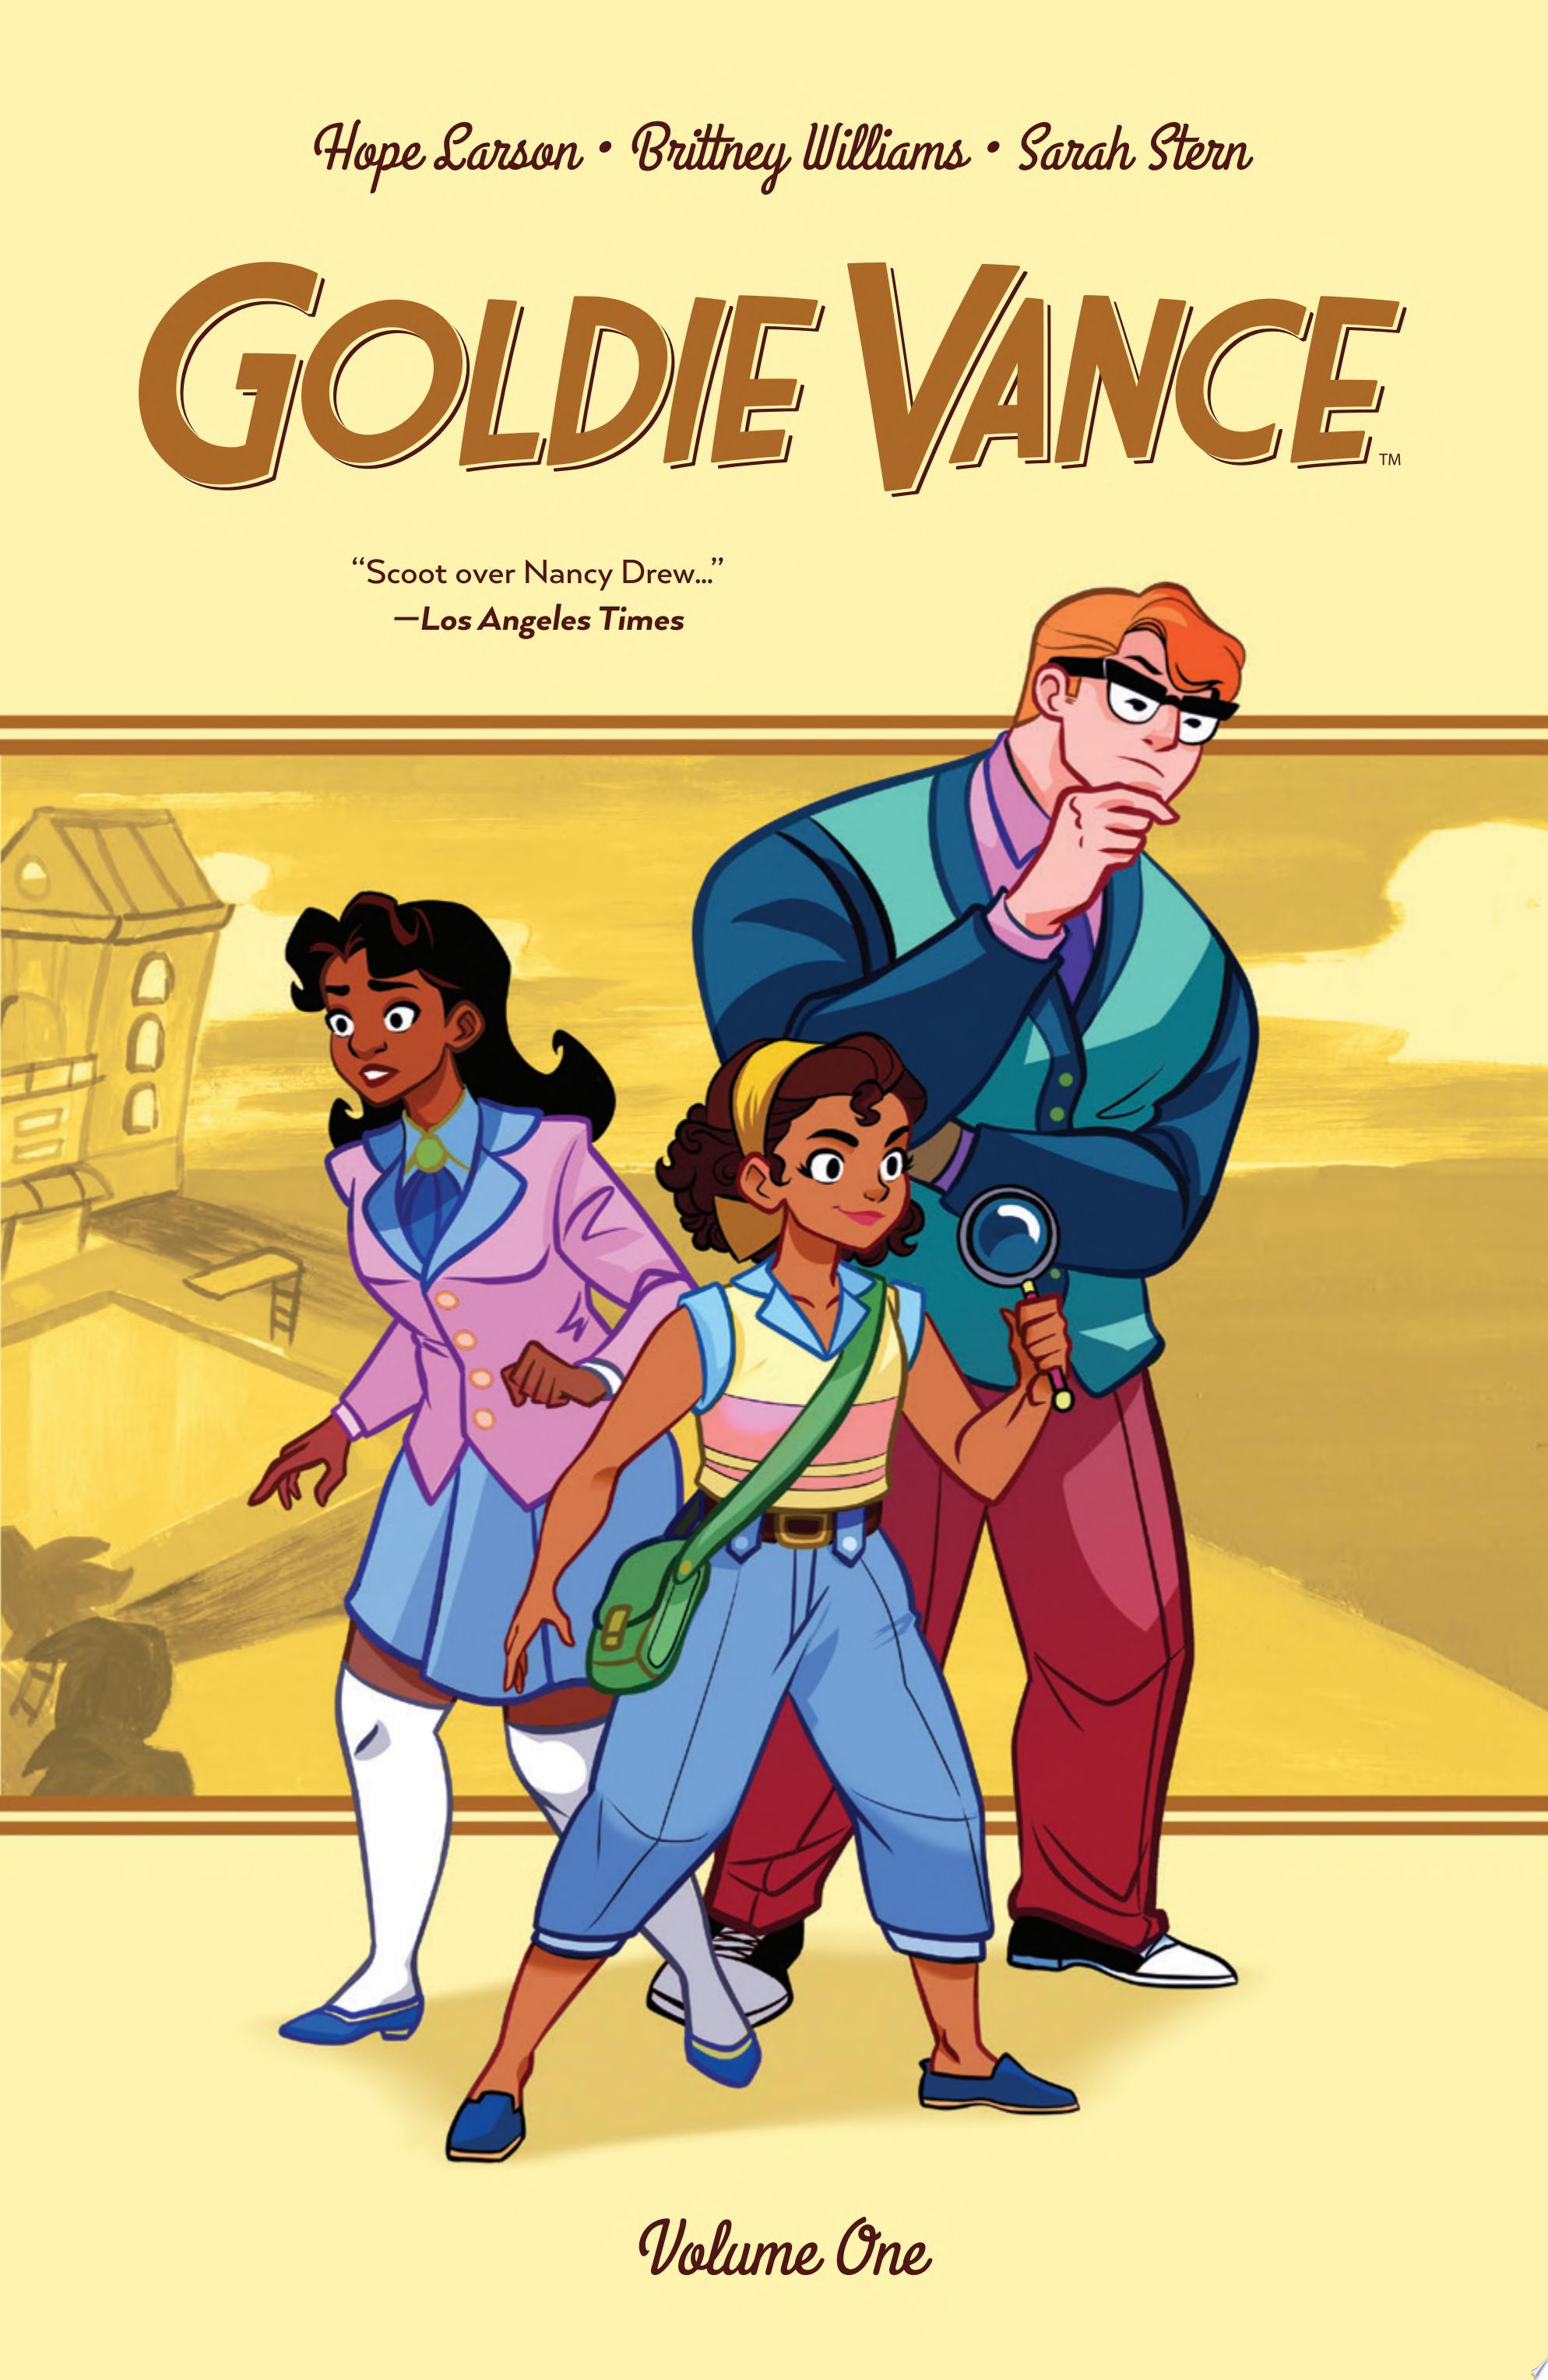 Image for "Goldie Vance"